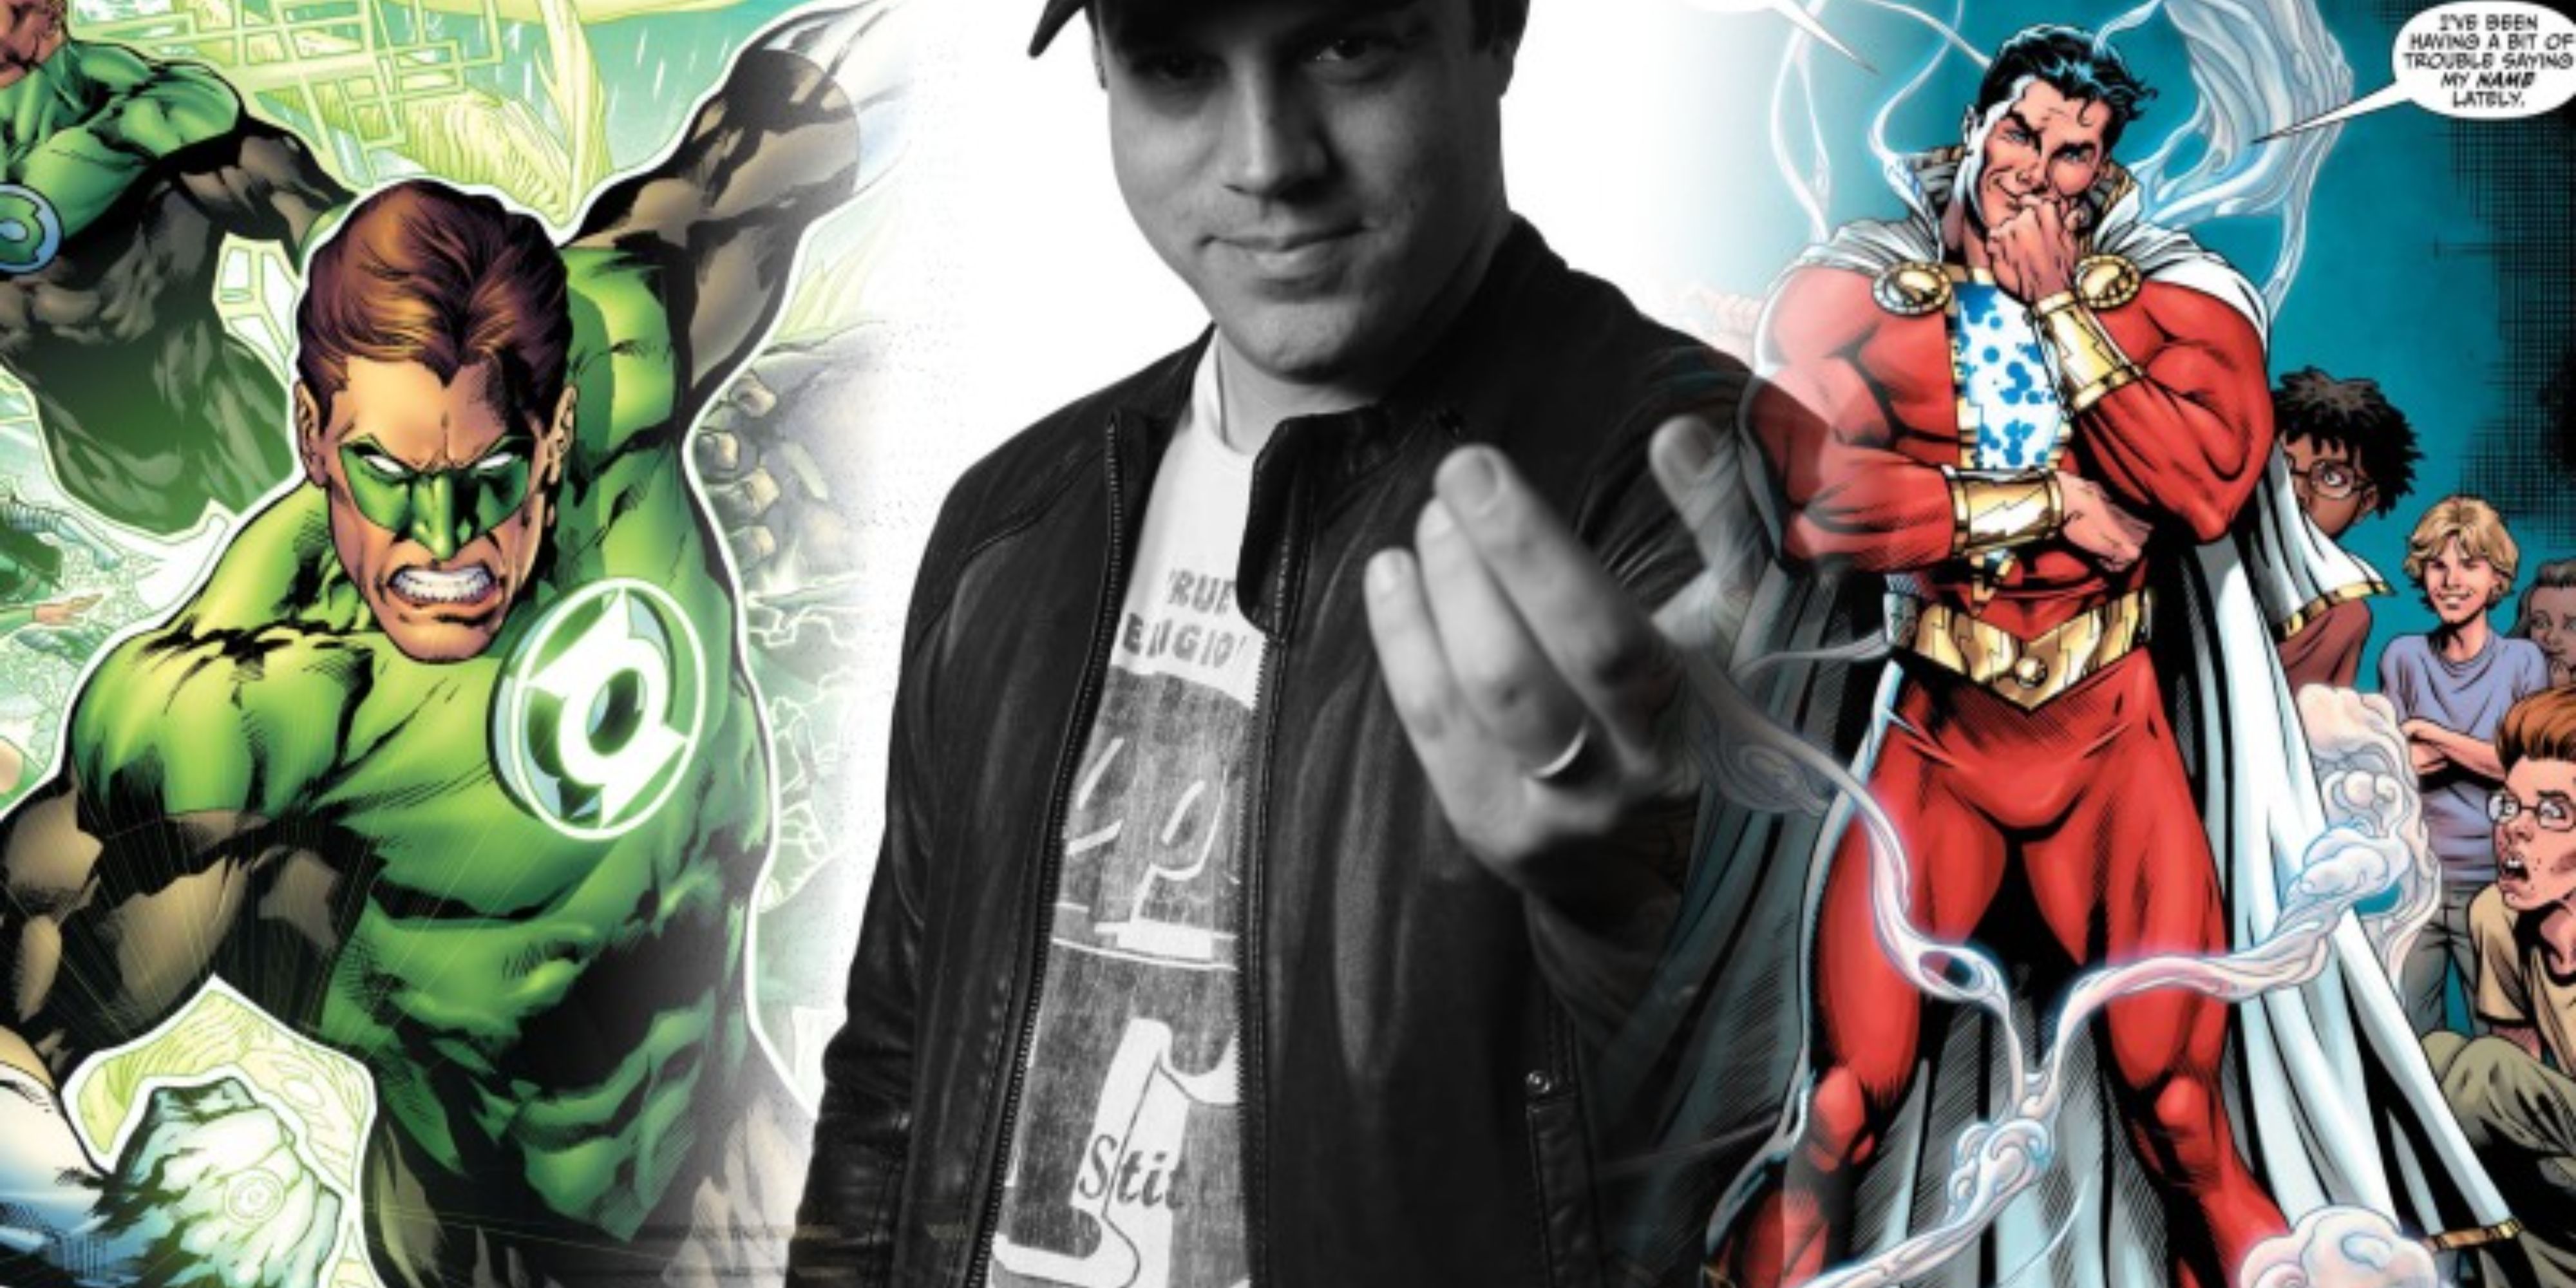 Geoff Johns next to images of Green Lantern and Captain Marvel.